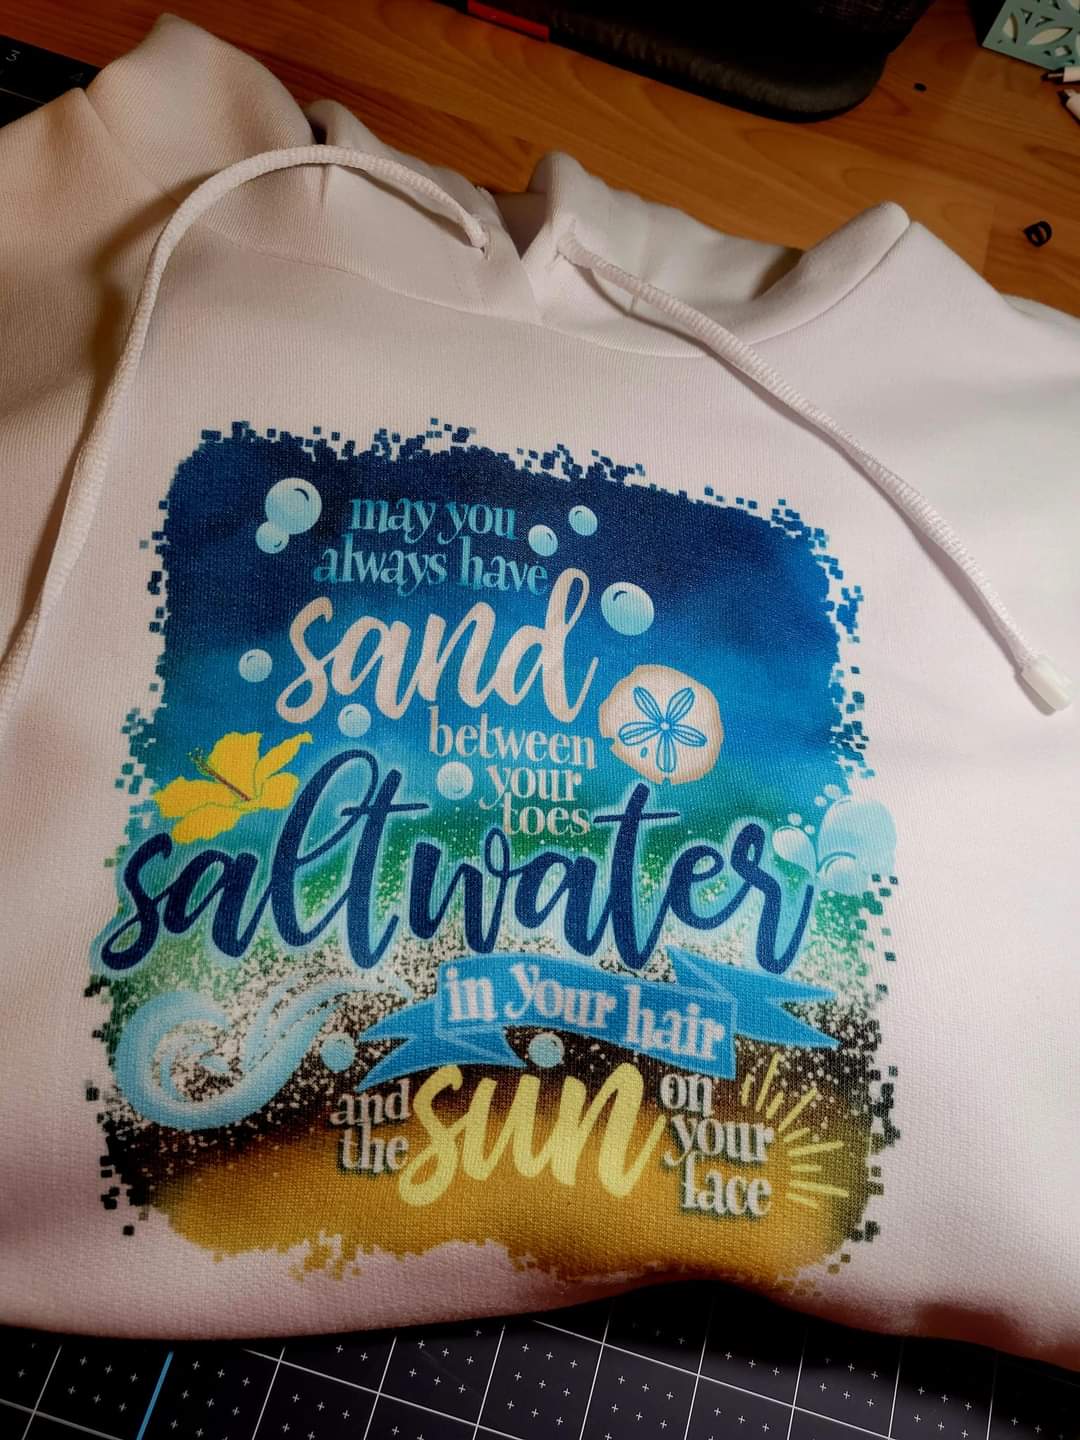 MAY YOU ALWAYS HAVE made with sublimation printing